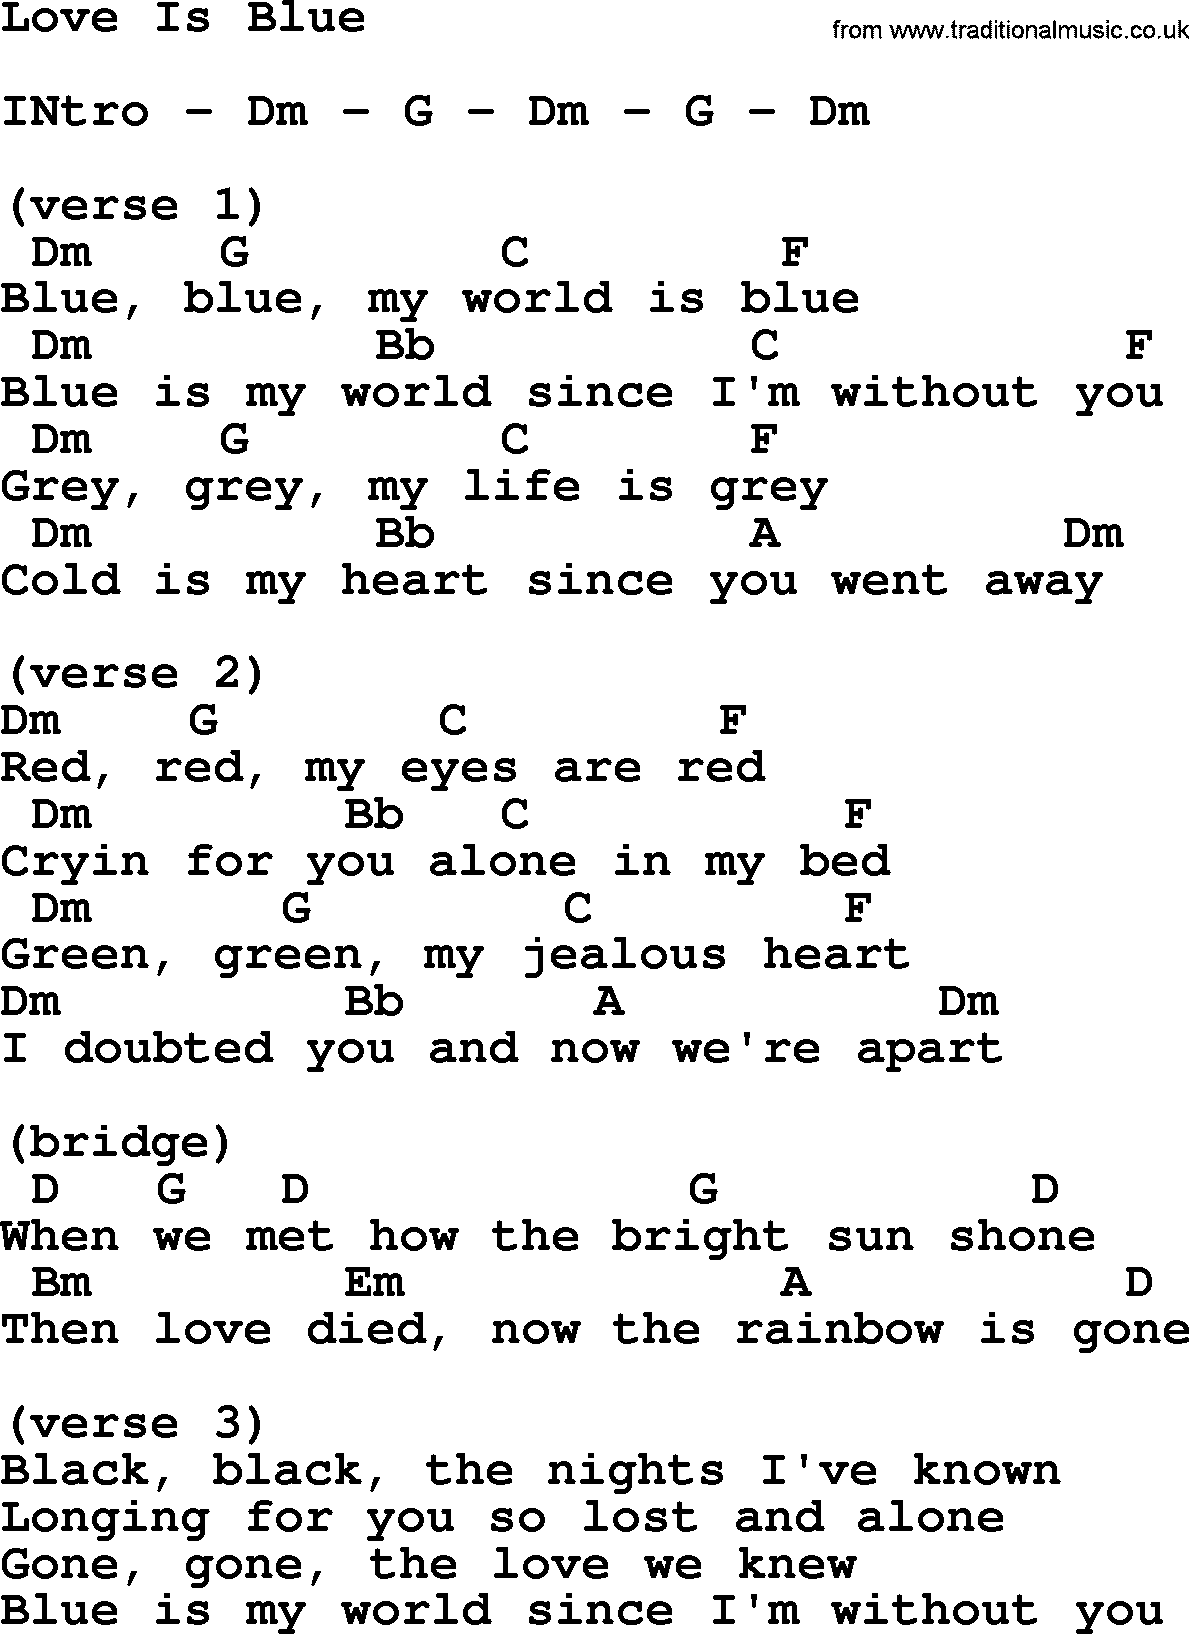 Marty Robbins song: Love Is Blue, lyrics and chords